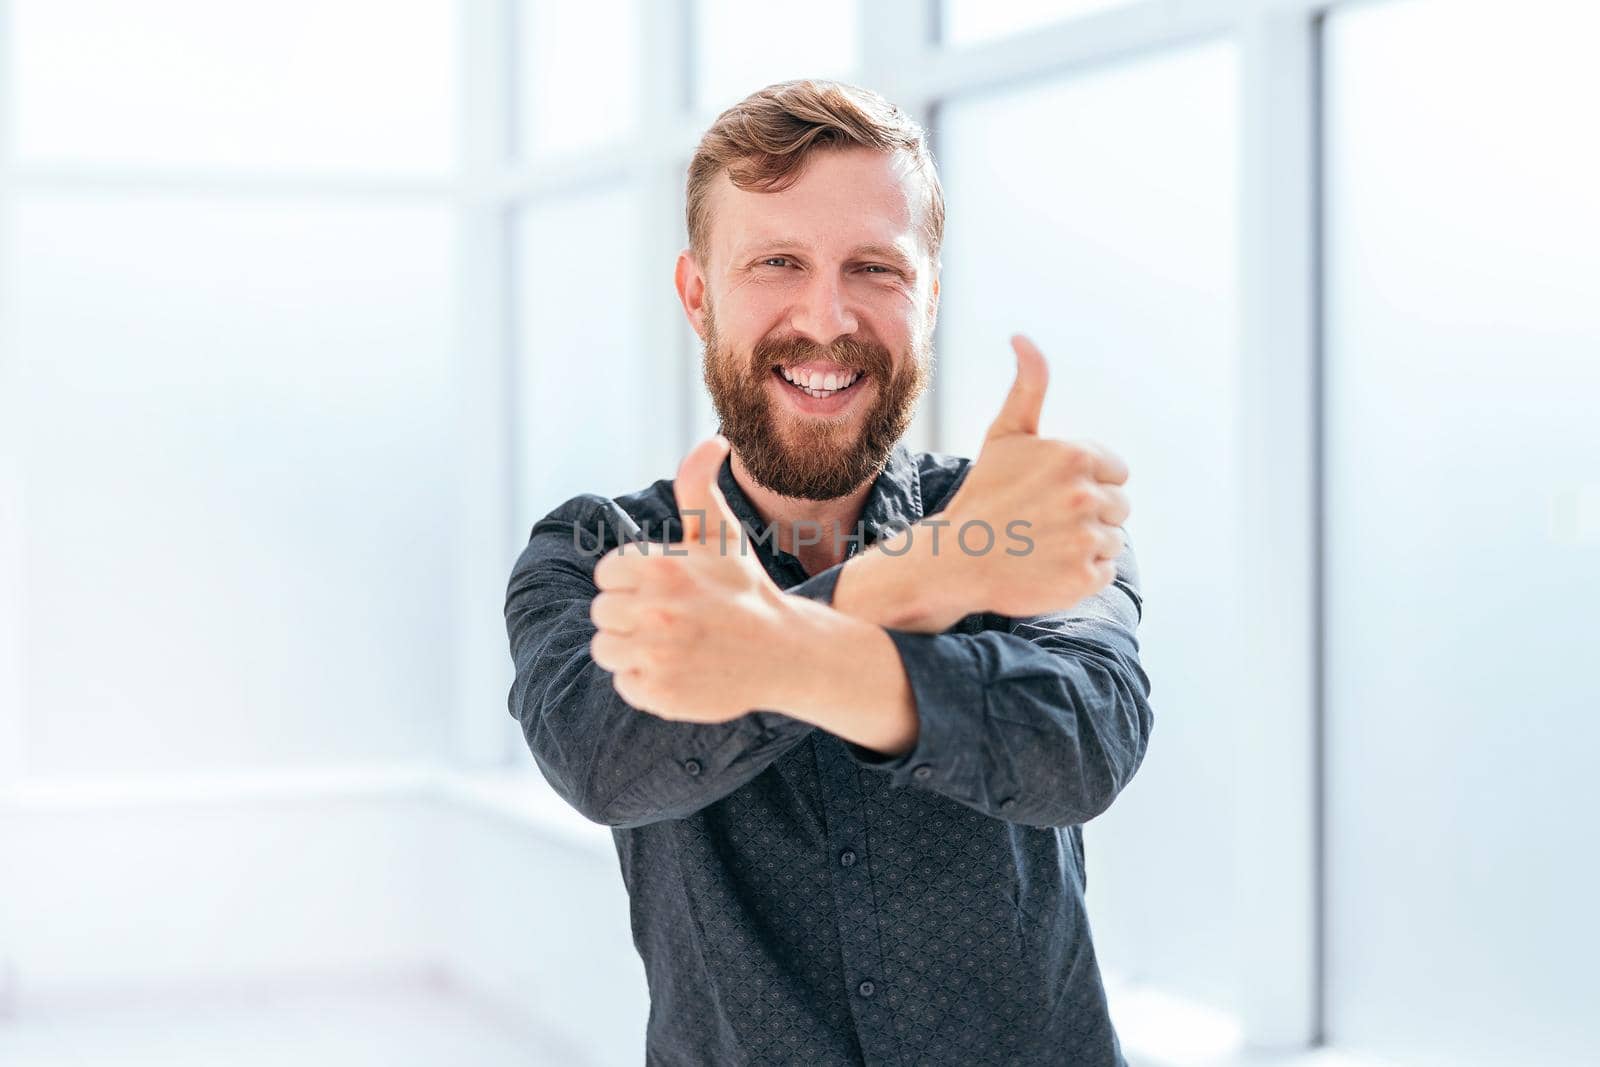 happy businessman showing thumbs up. photo with copy space by SmartPhotoLab